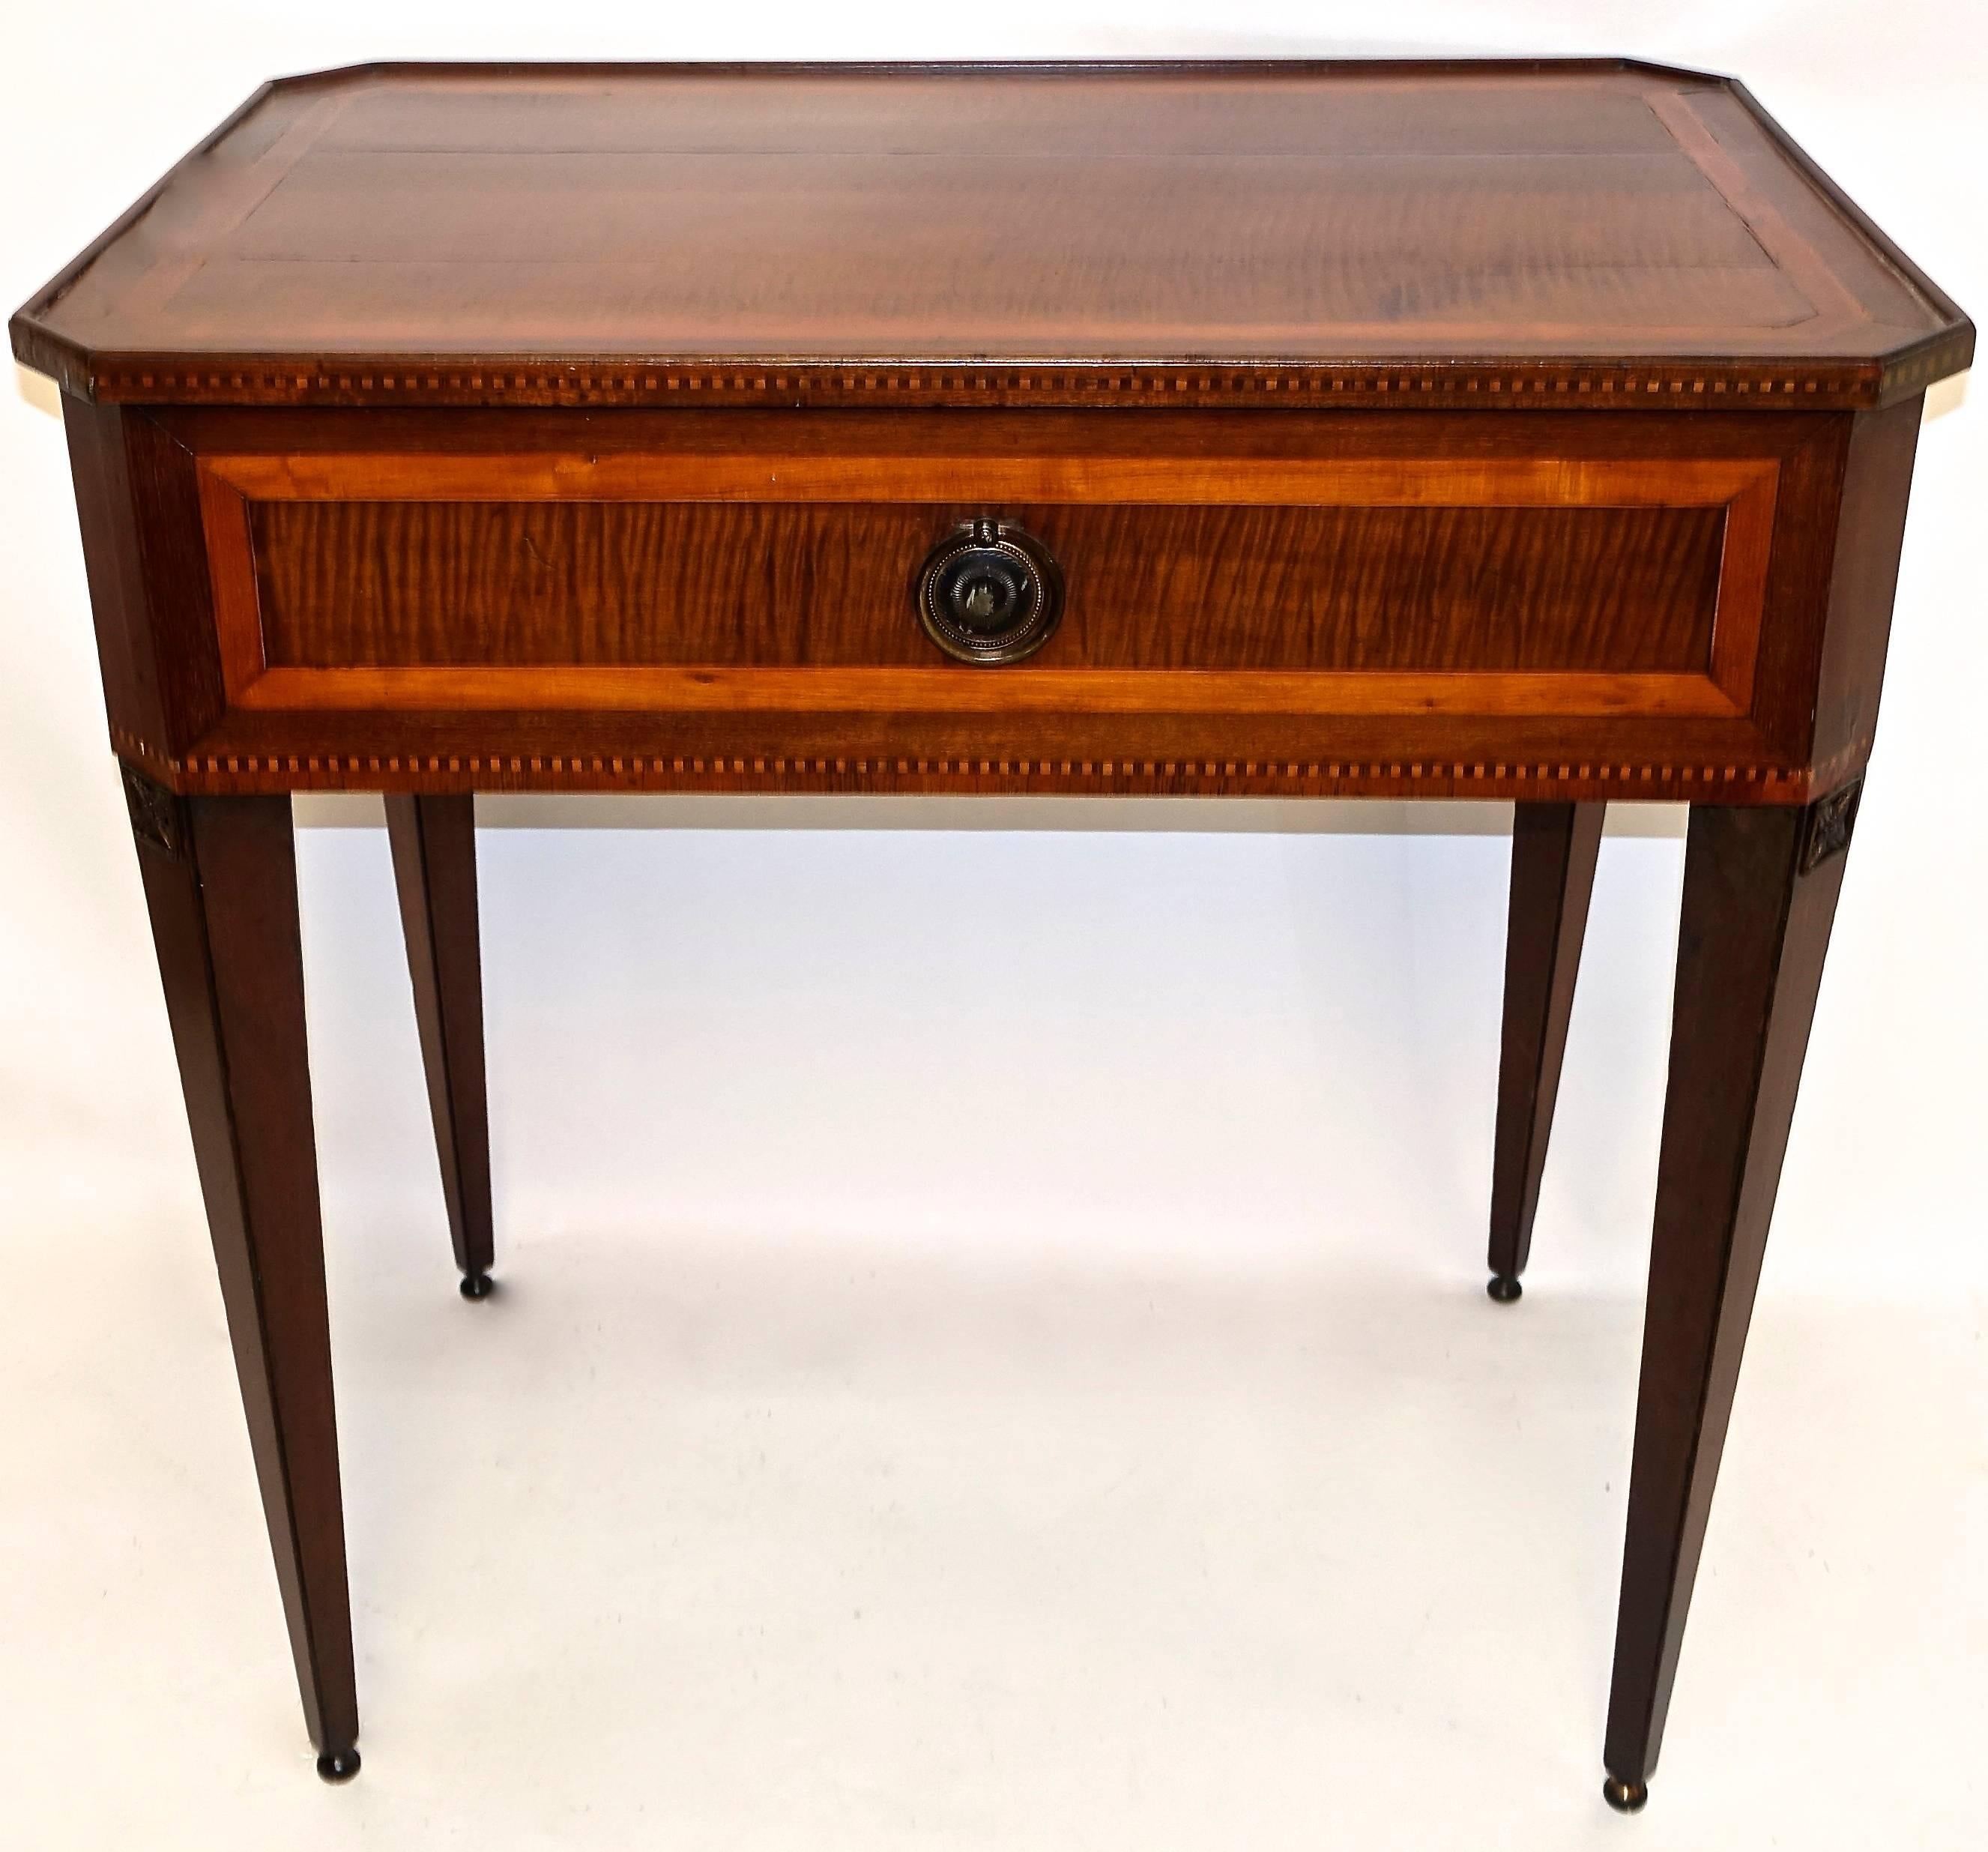 Early 19th Century Neoclassical Mahogany and Satinwood Inlay Tray Top Table Dutch, 19th Century For Sale